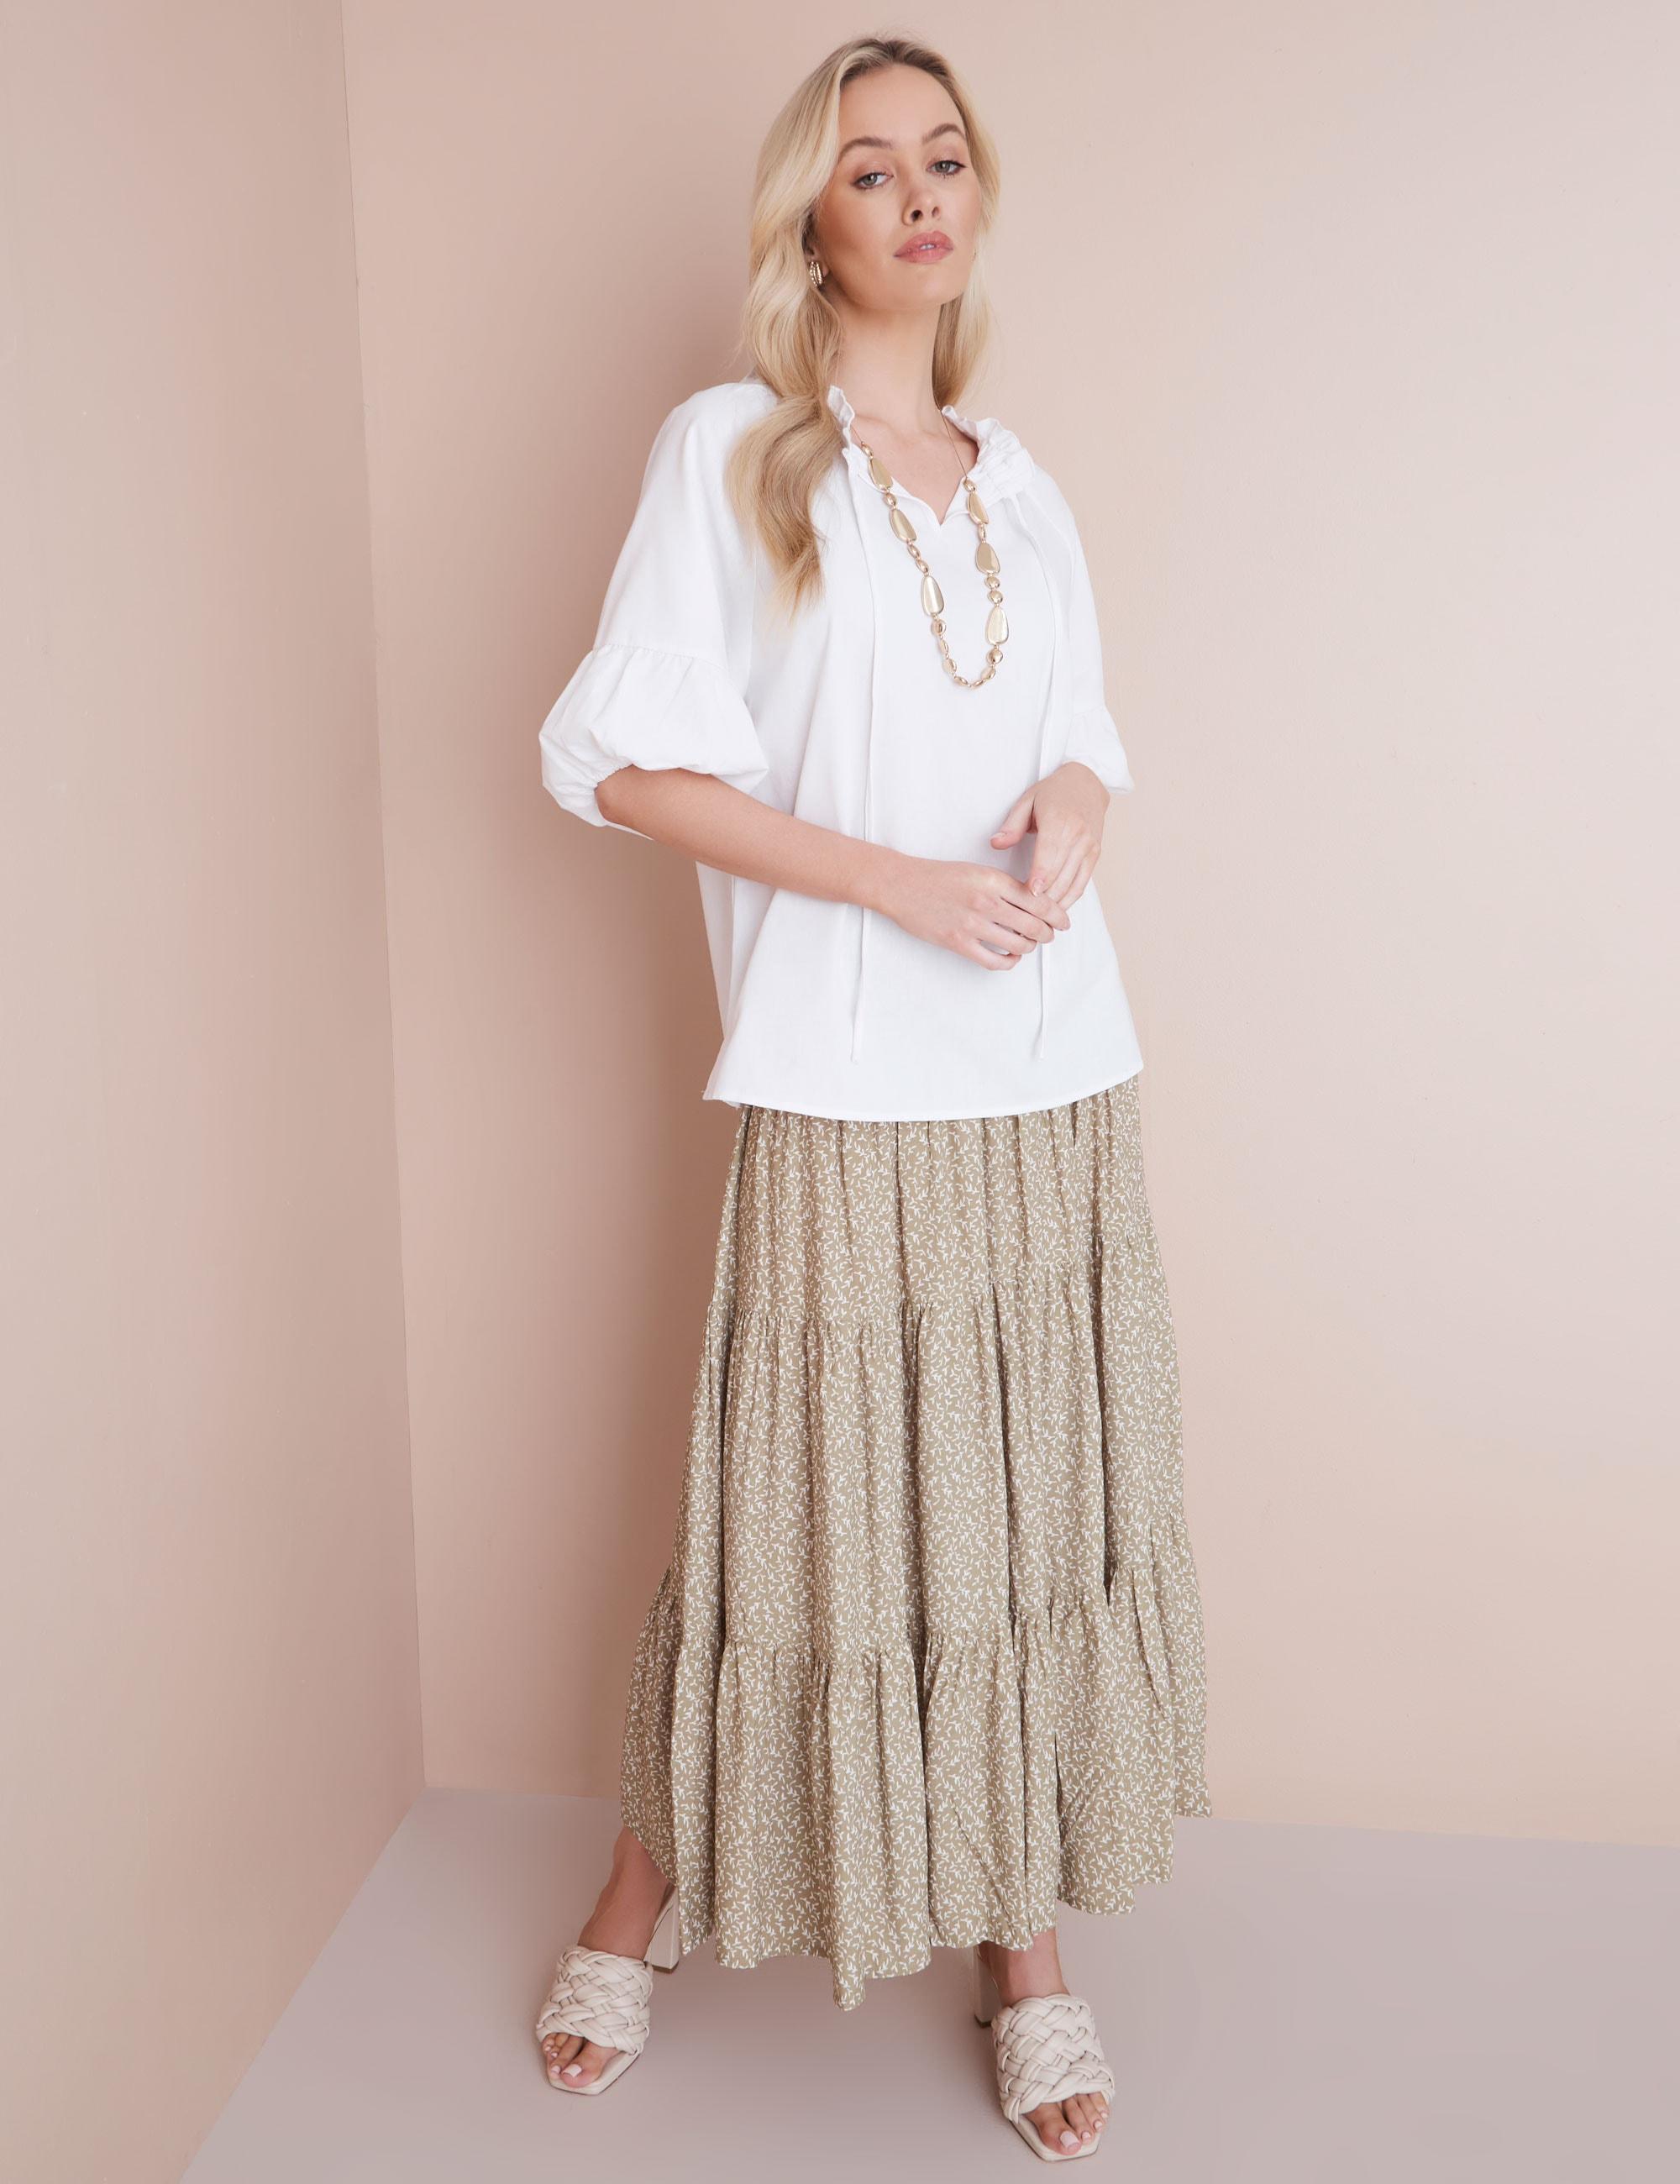 NONI B - Womens Skirts - Maxi - Summer - Green - A Line - Smart Casual Fashion - Leaf - Oversized - Shirred Waist Tiered - Long - Office Work Clothes